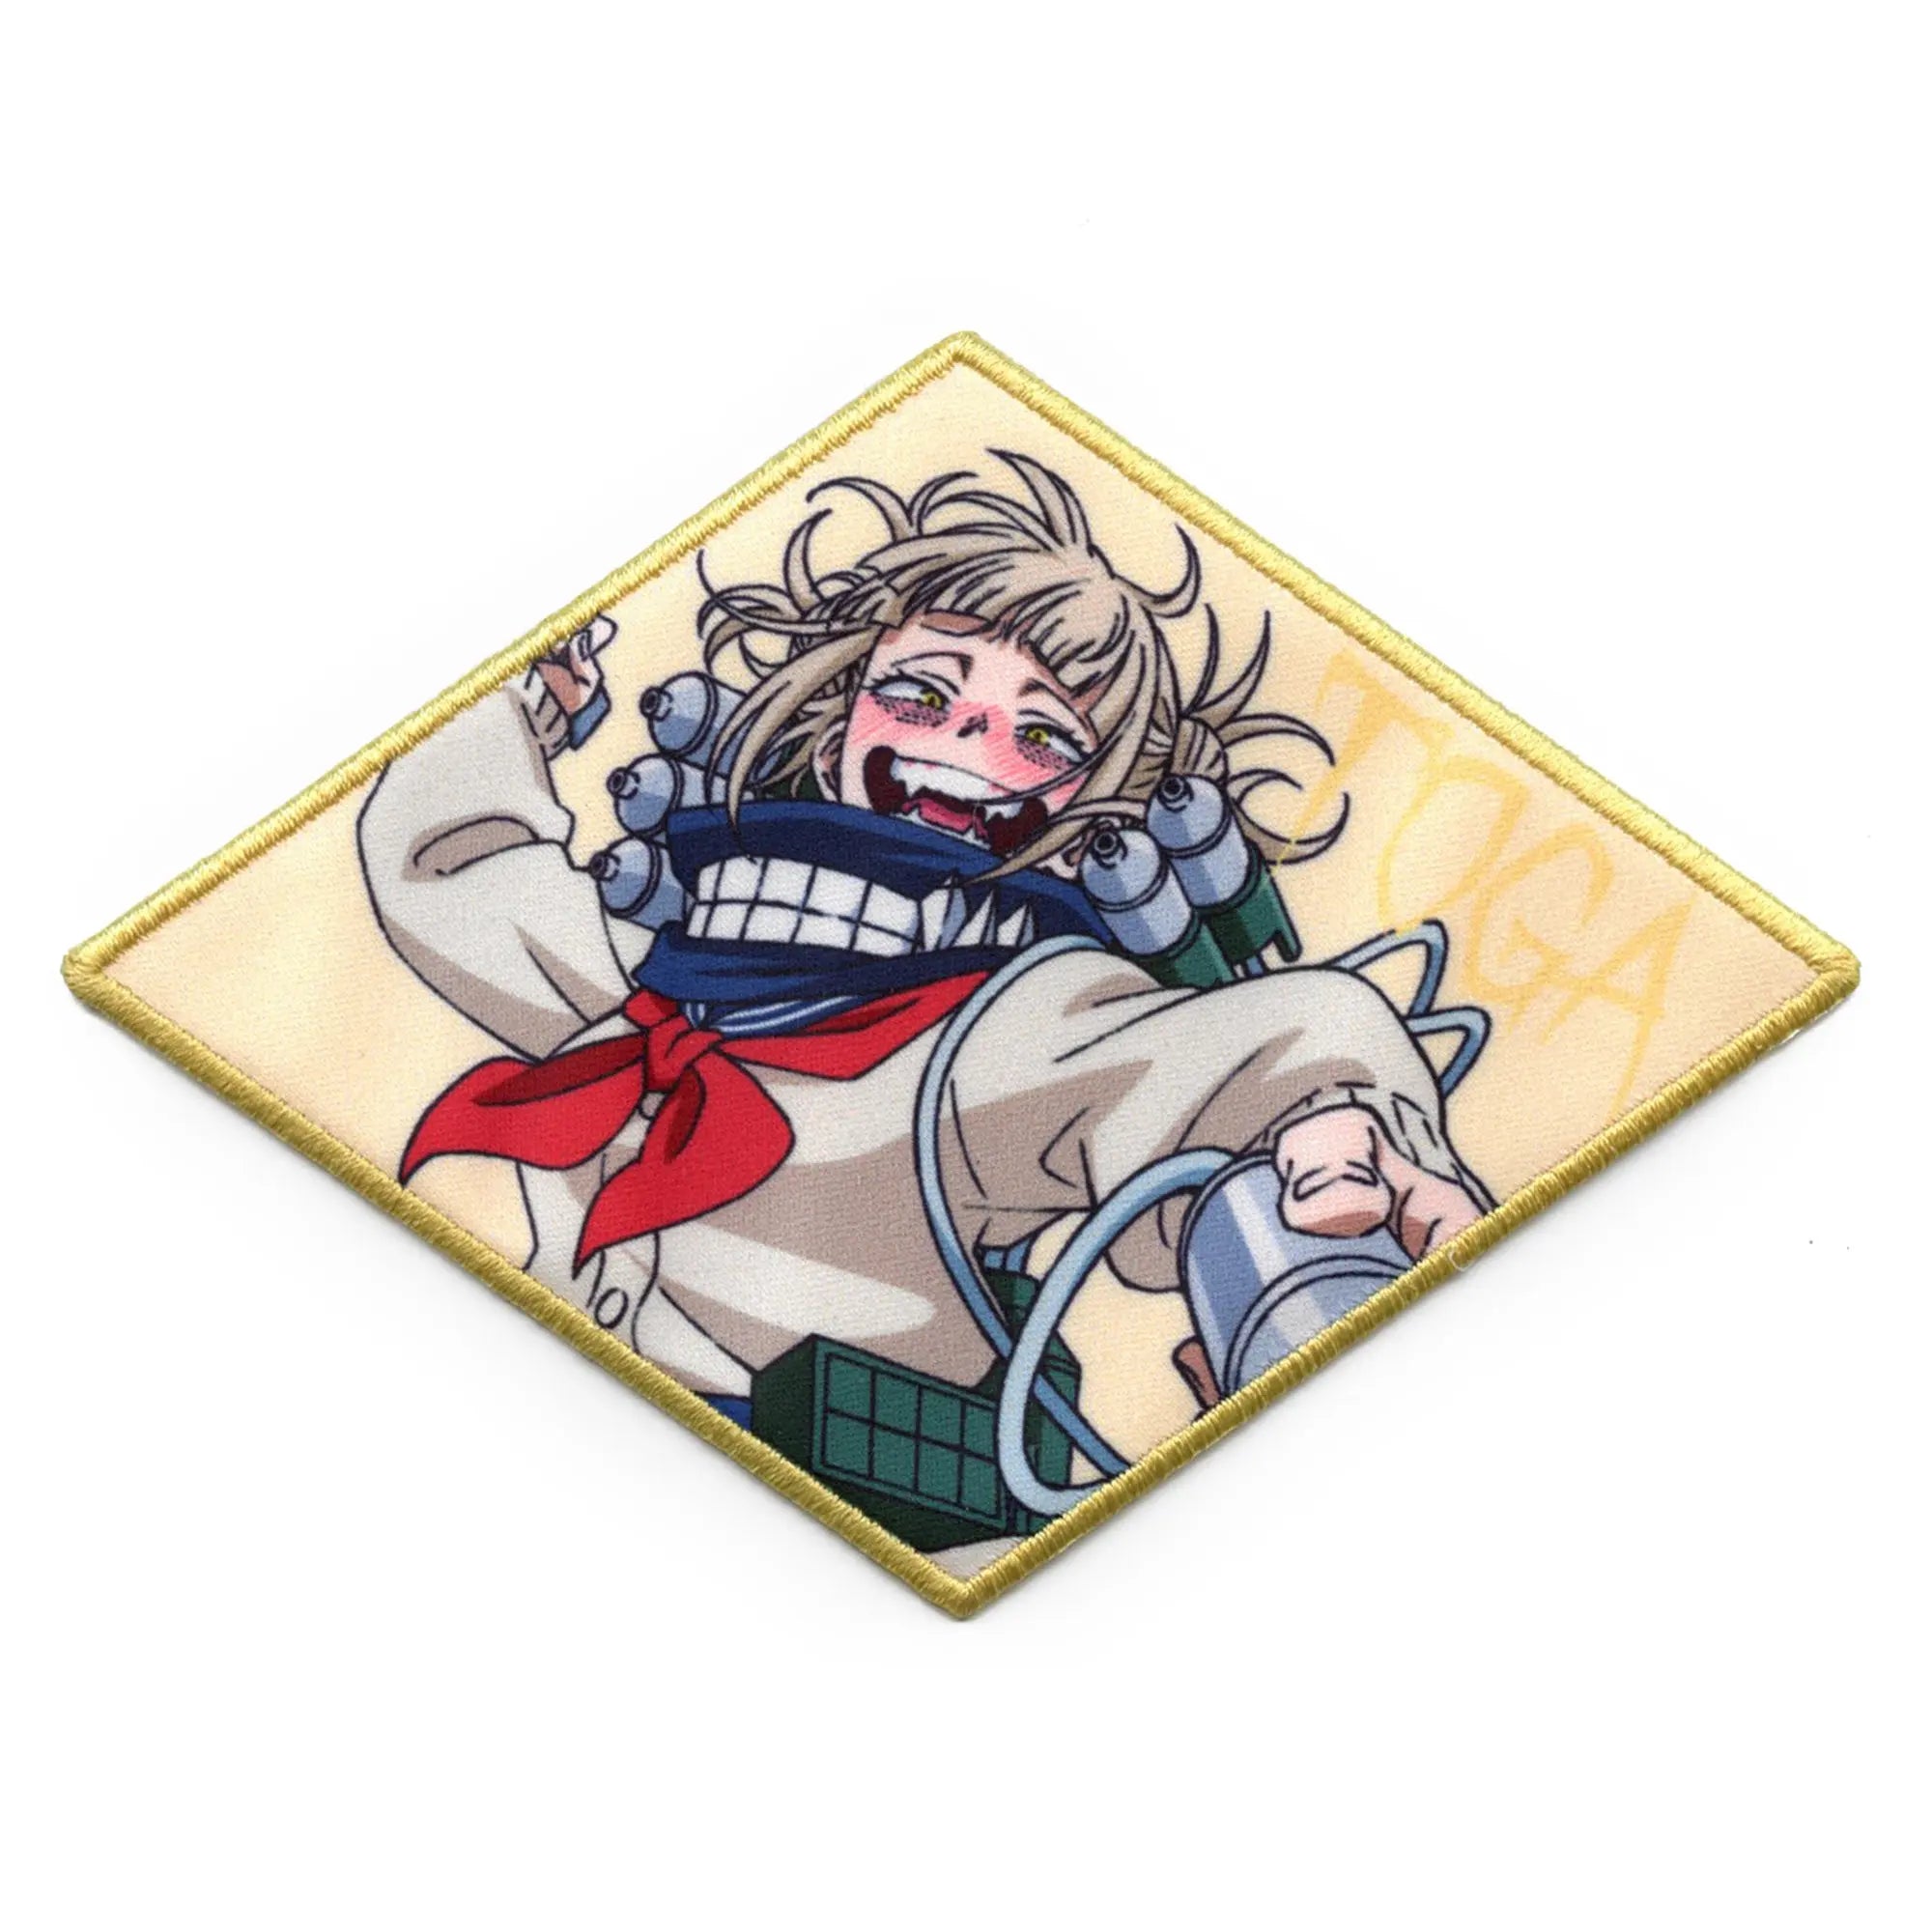 My wallpaper (himiko toga), icon pack (whicons). Just joking my real  wallpaper is the second one (fullmetal alchemist even if my favorite anime  is one piece but no one asked so see